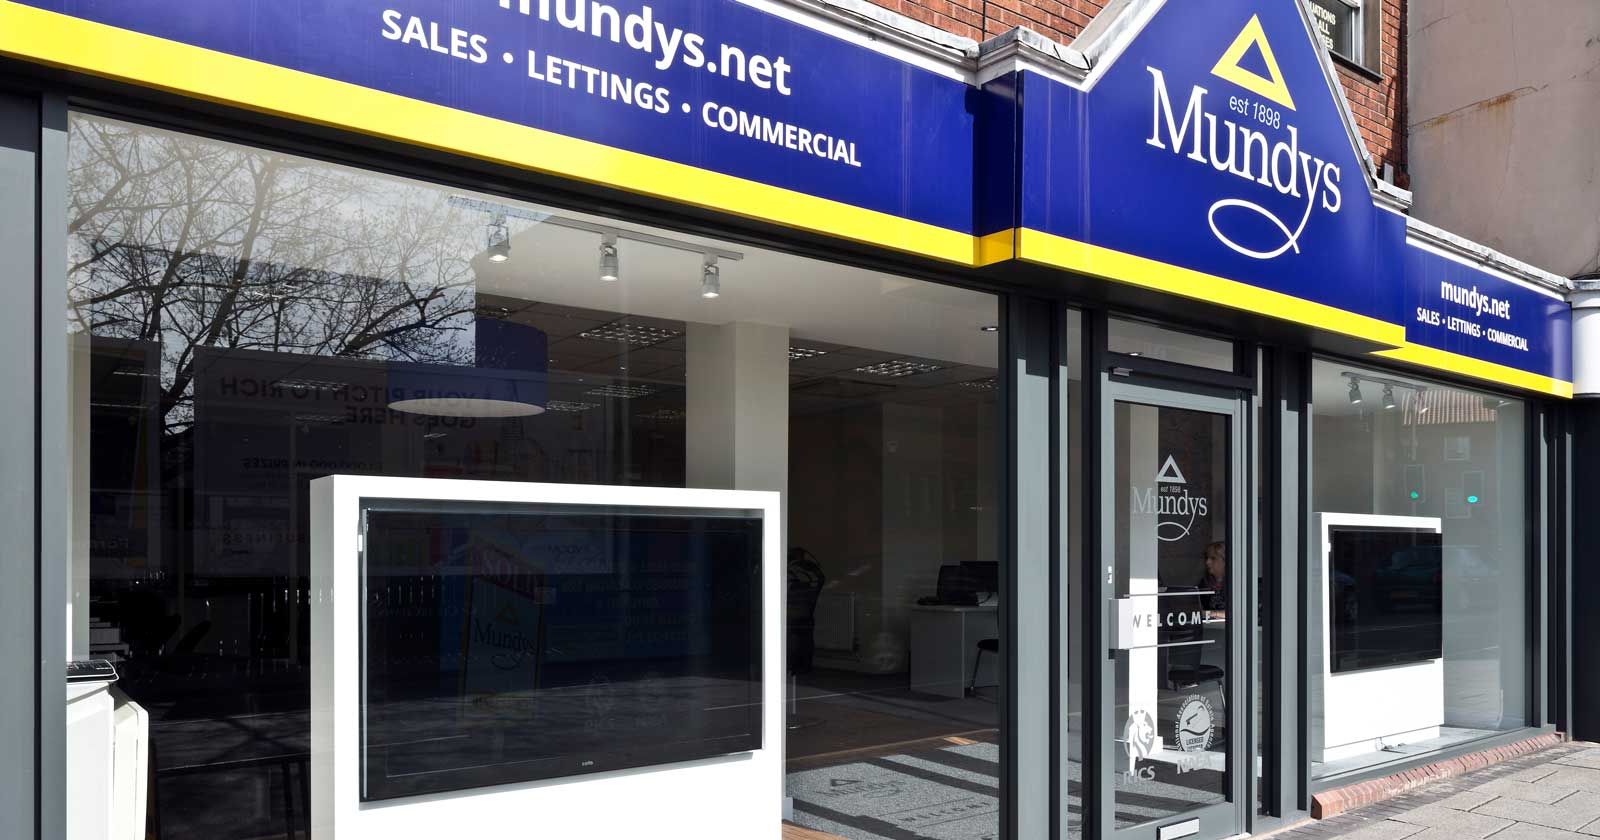 Mundys external signage installed by APSS